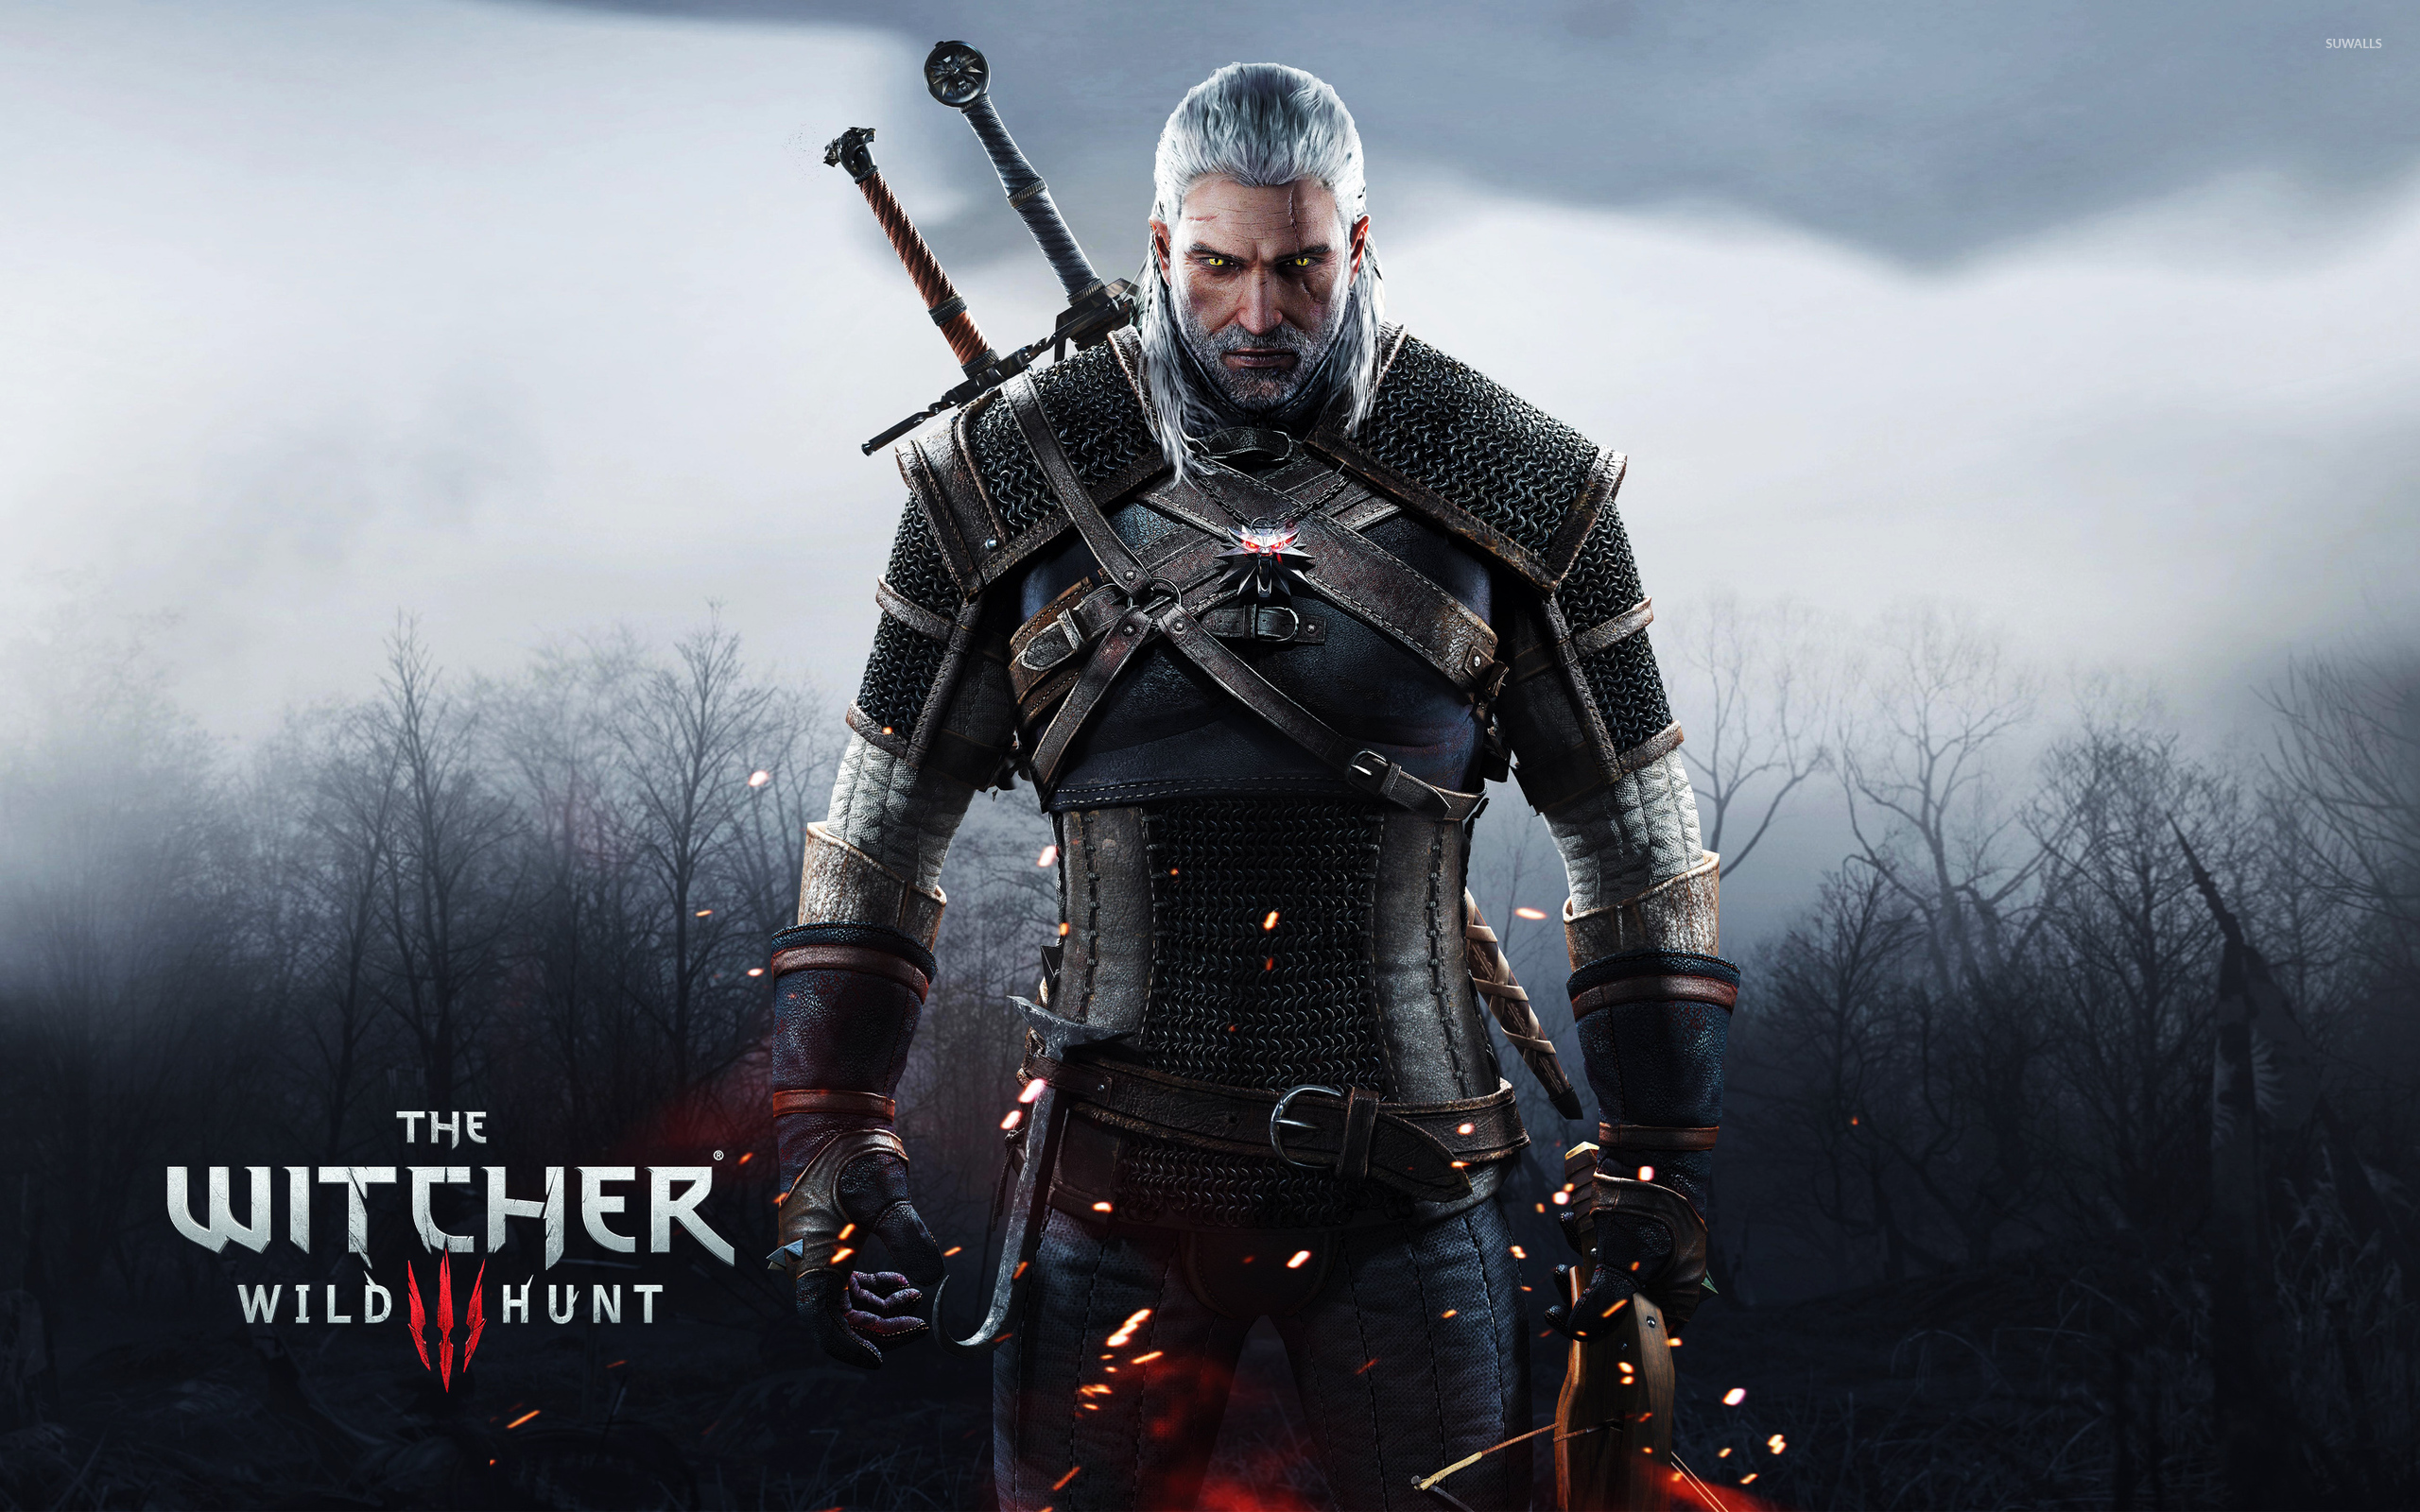    The Witcher 3 Wild Hunt wallpaper   Game wallpapers   49582 2560x1600